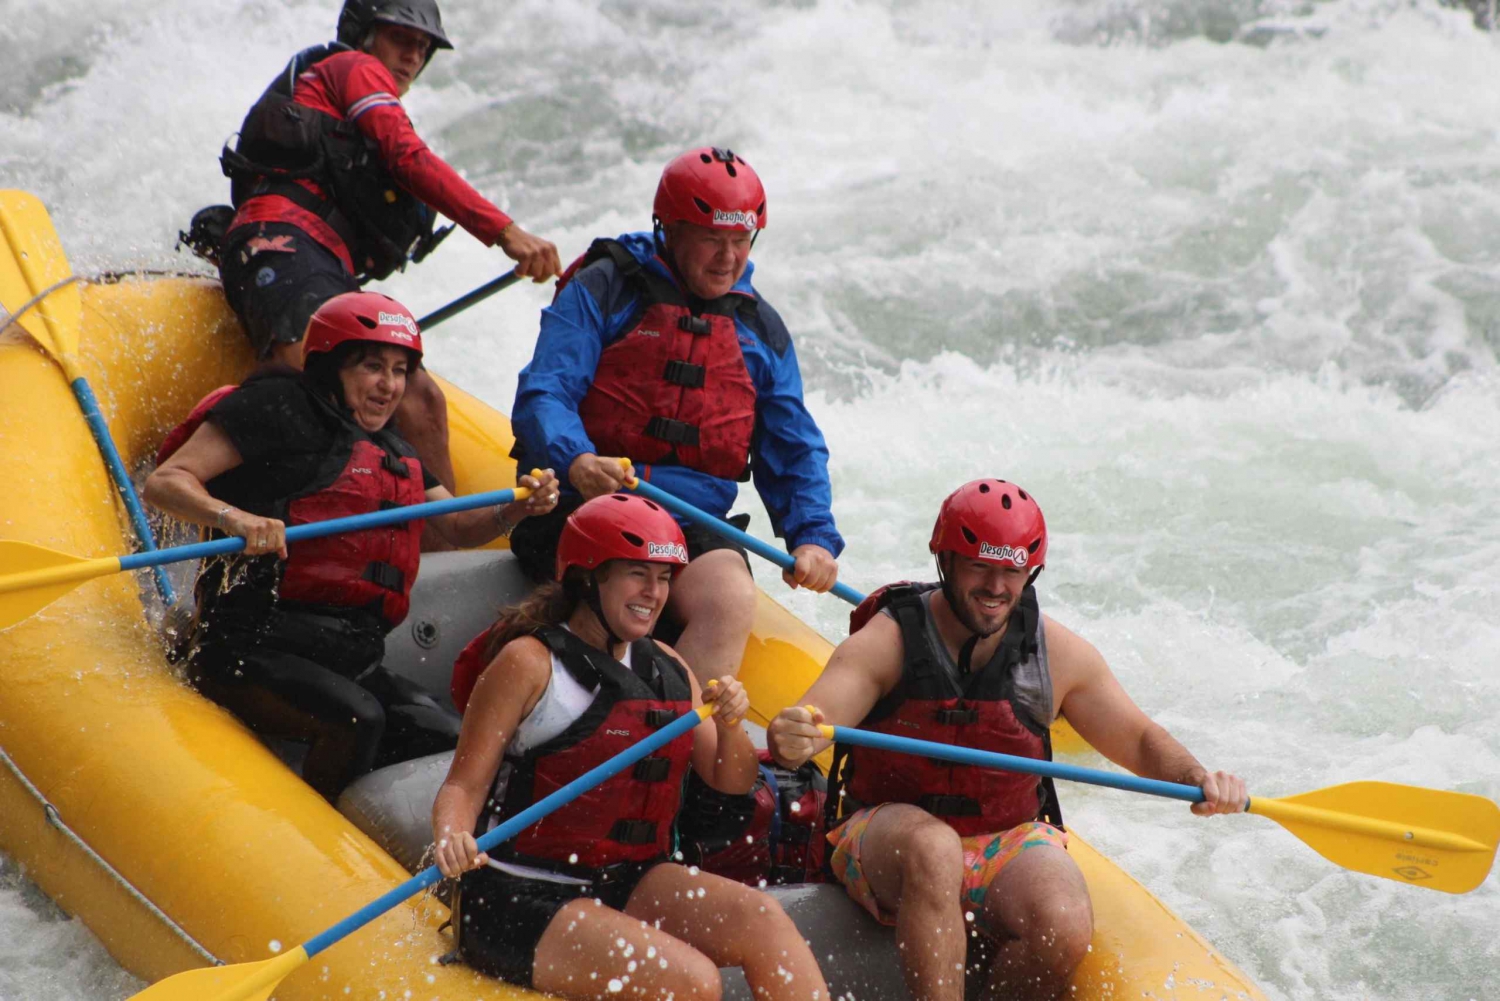 San Jose Rafting Class 3-4 with Connection to La Fortuna